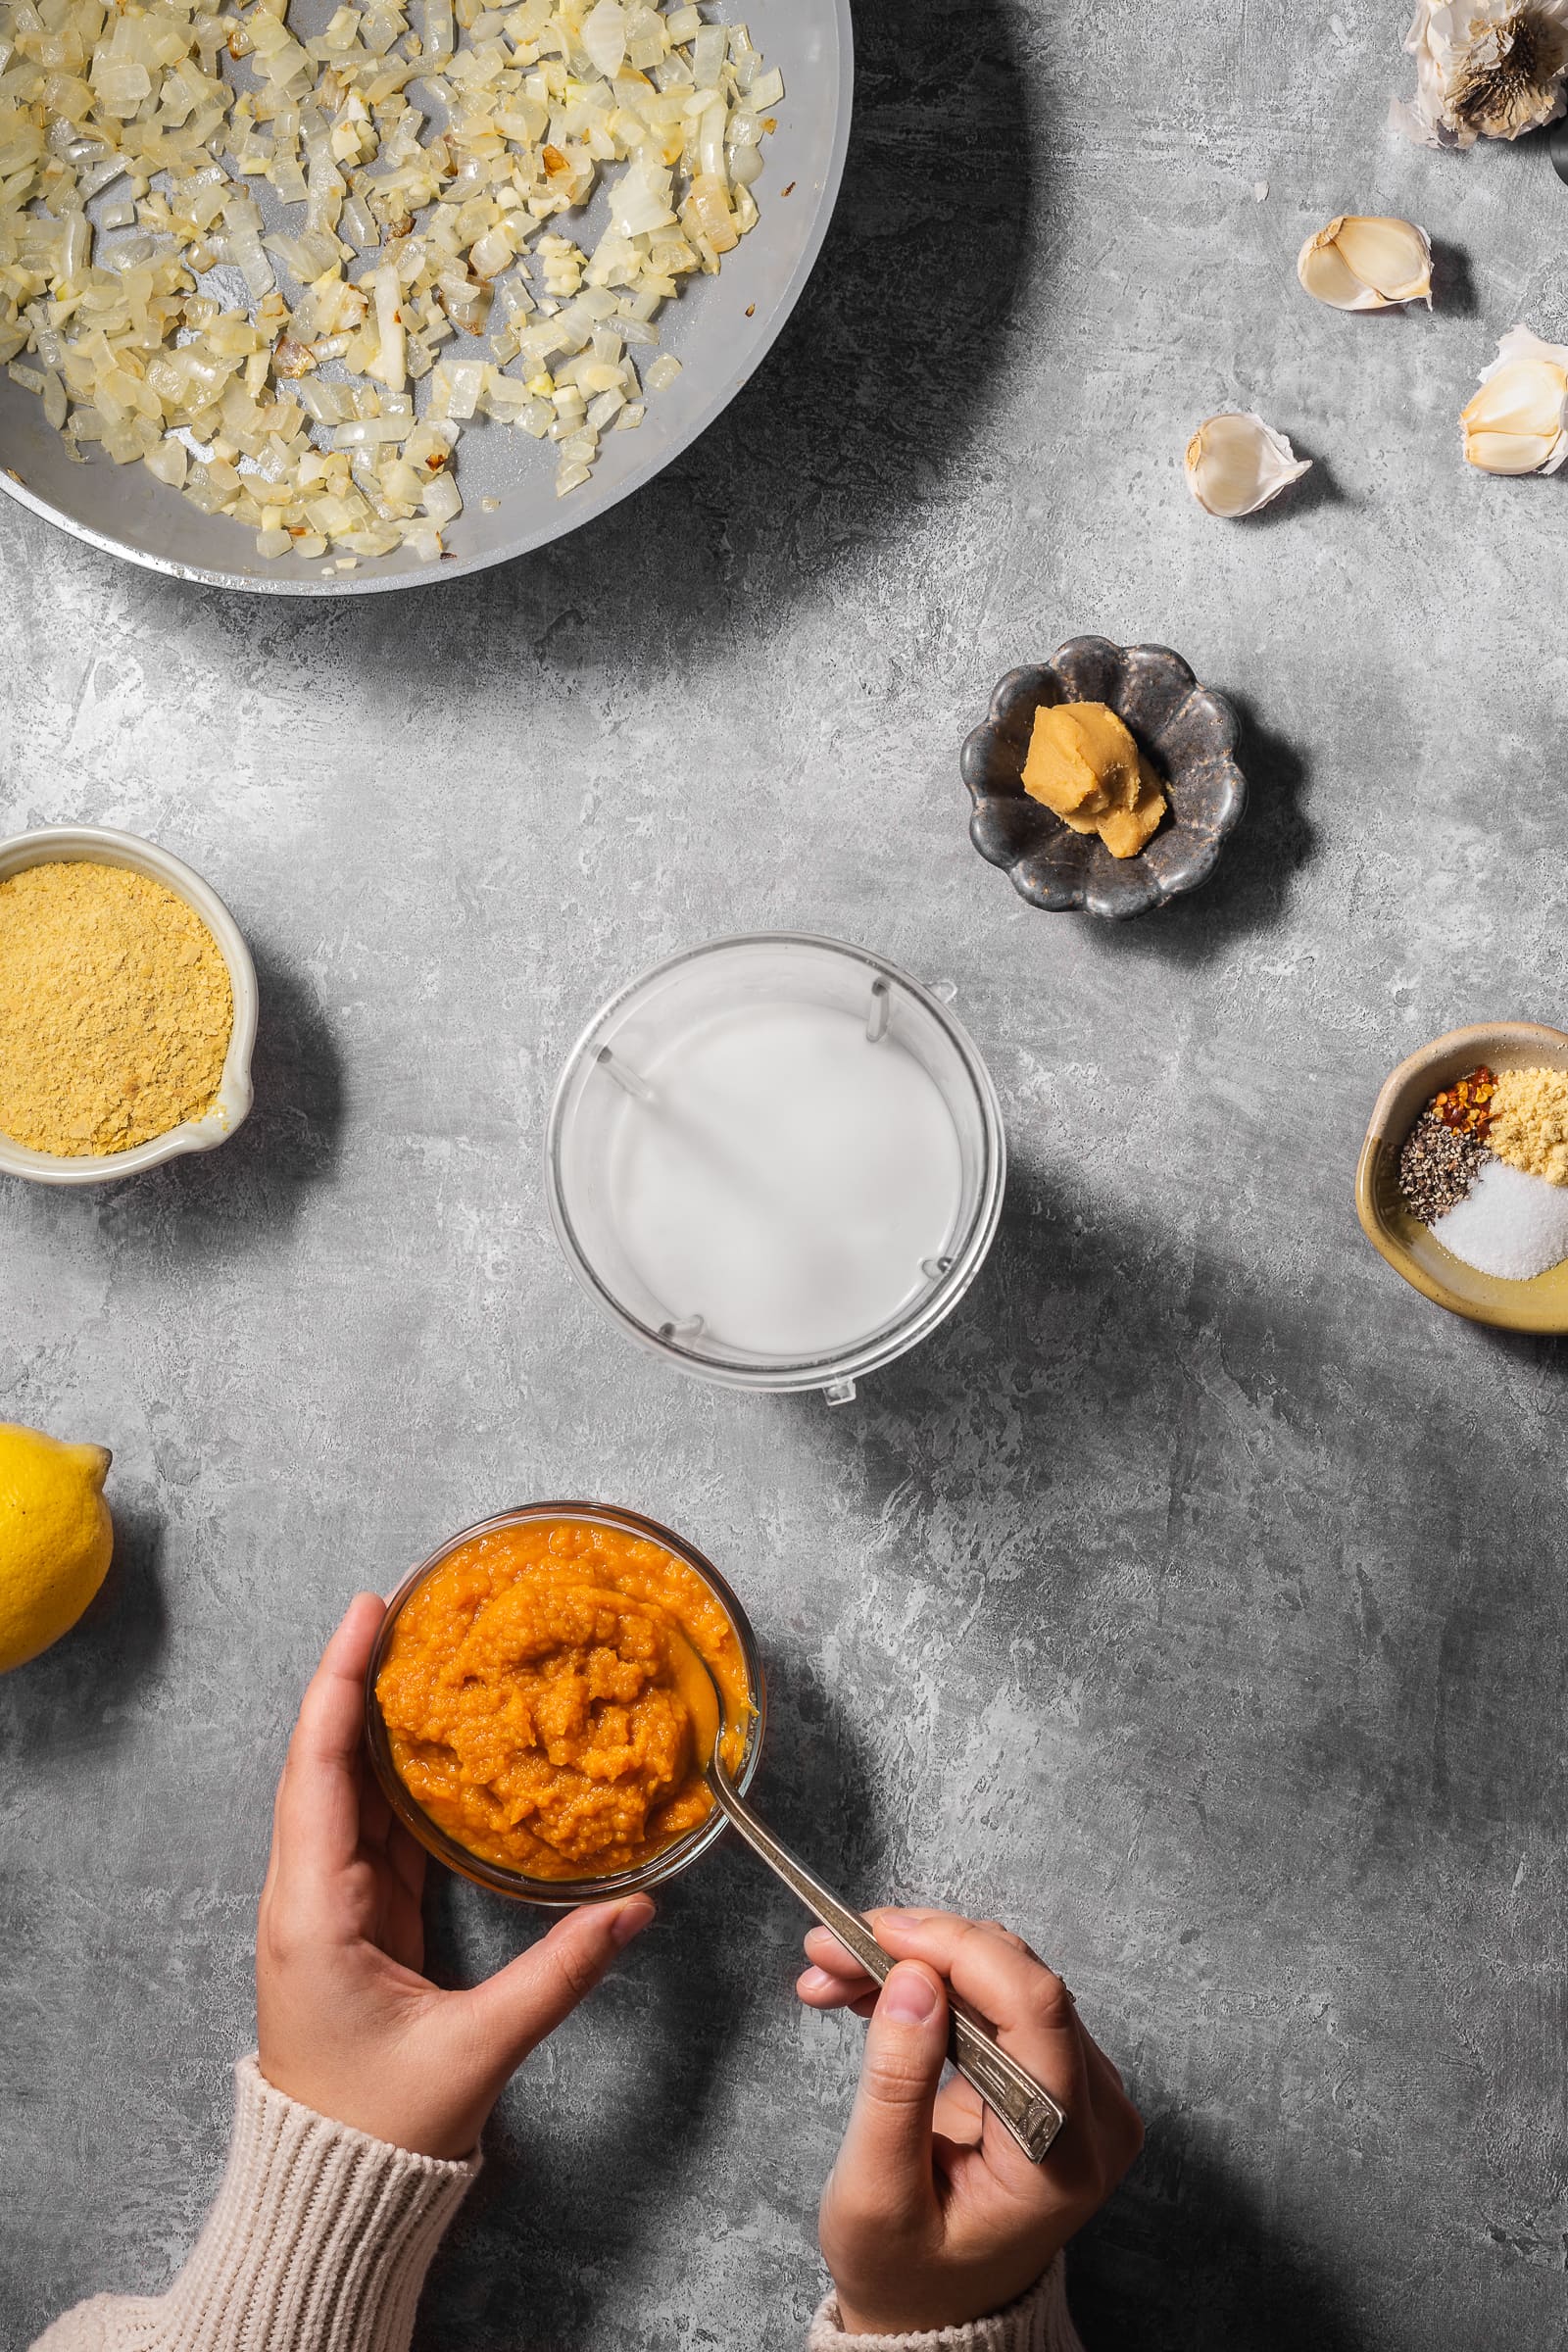 Pumpkin ingredients being placed into a blender.